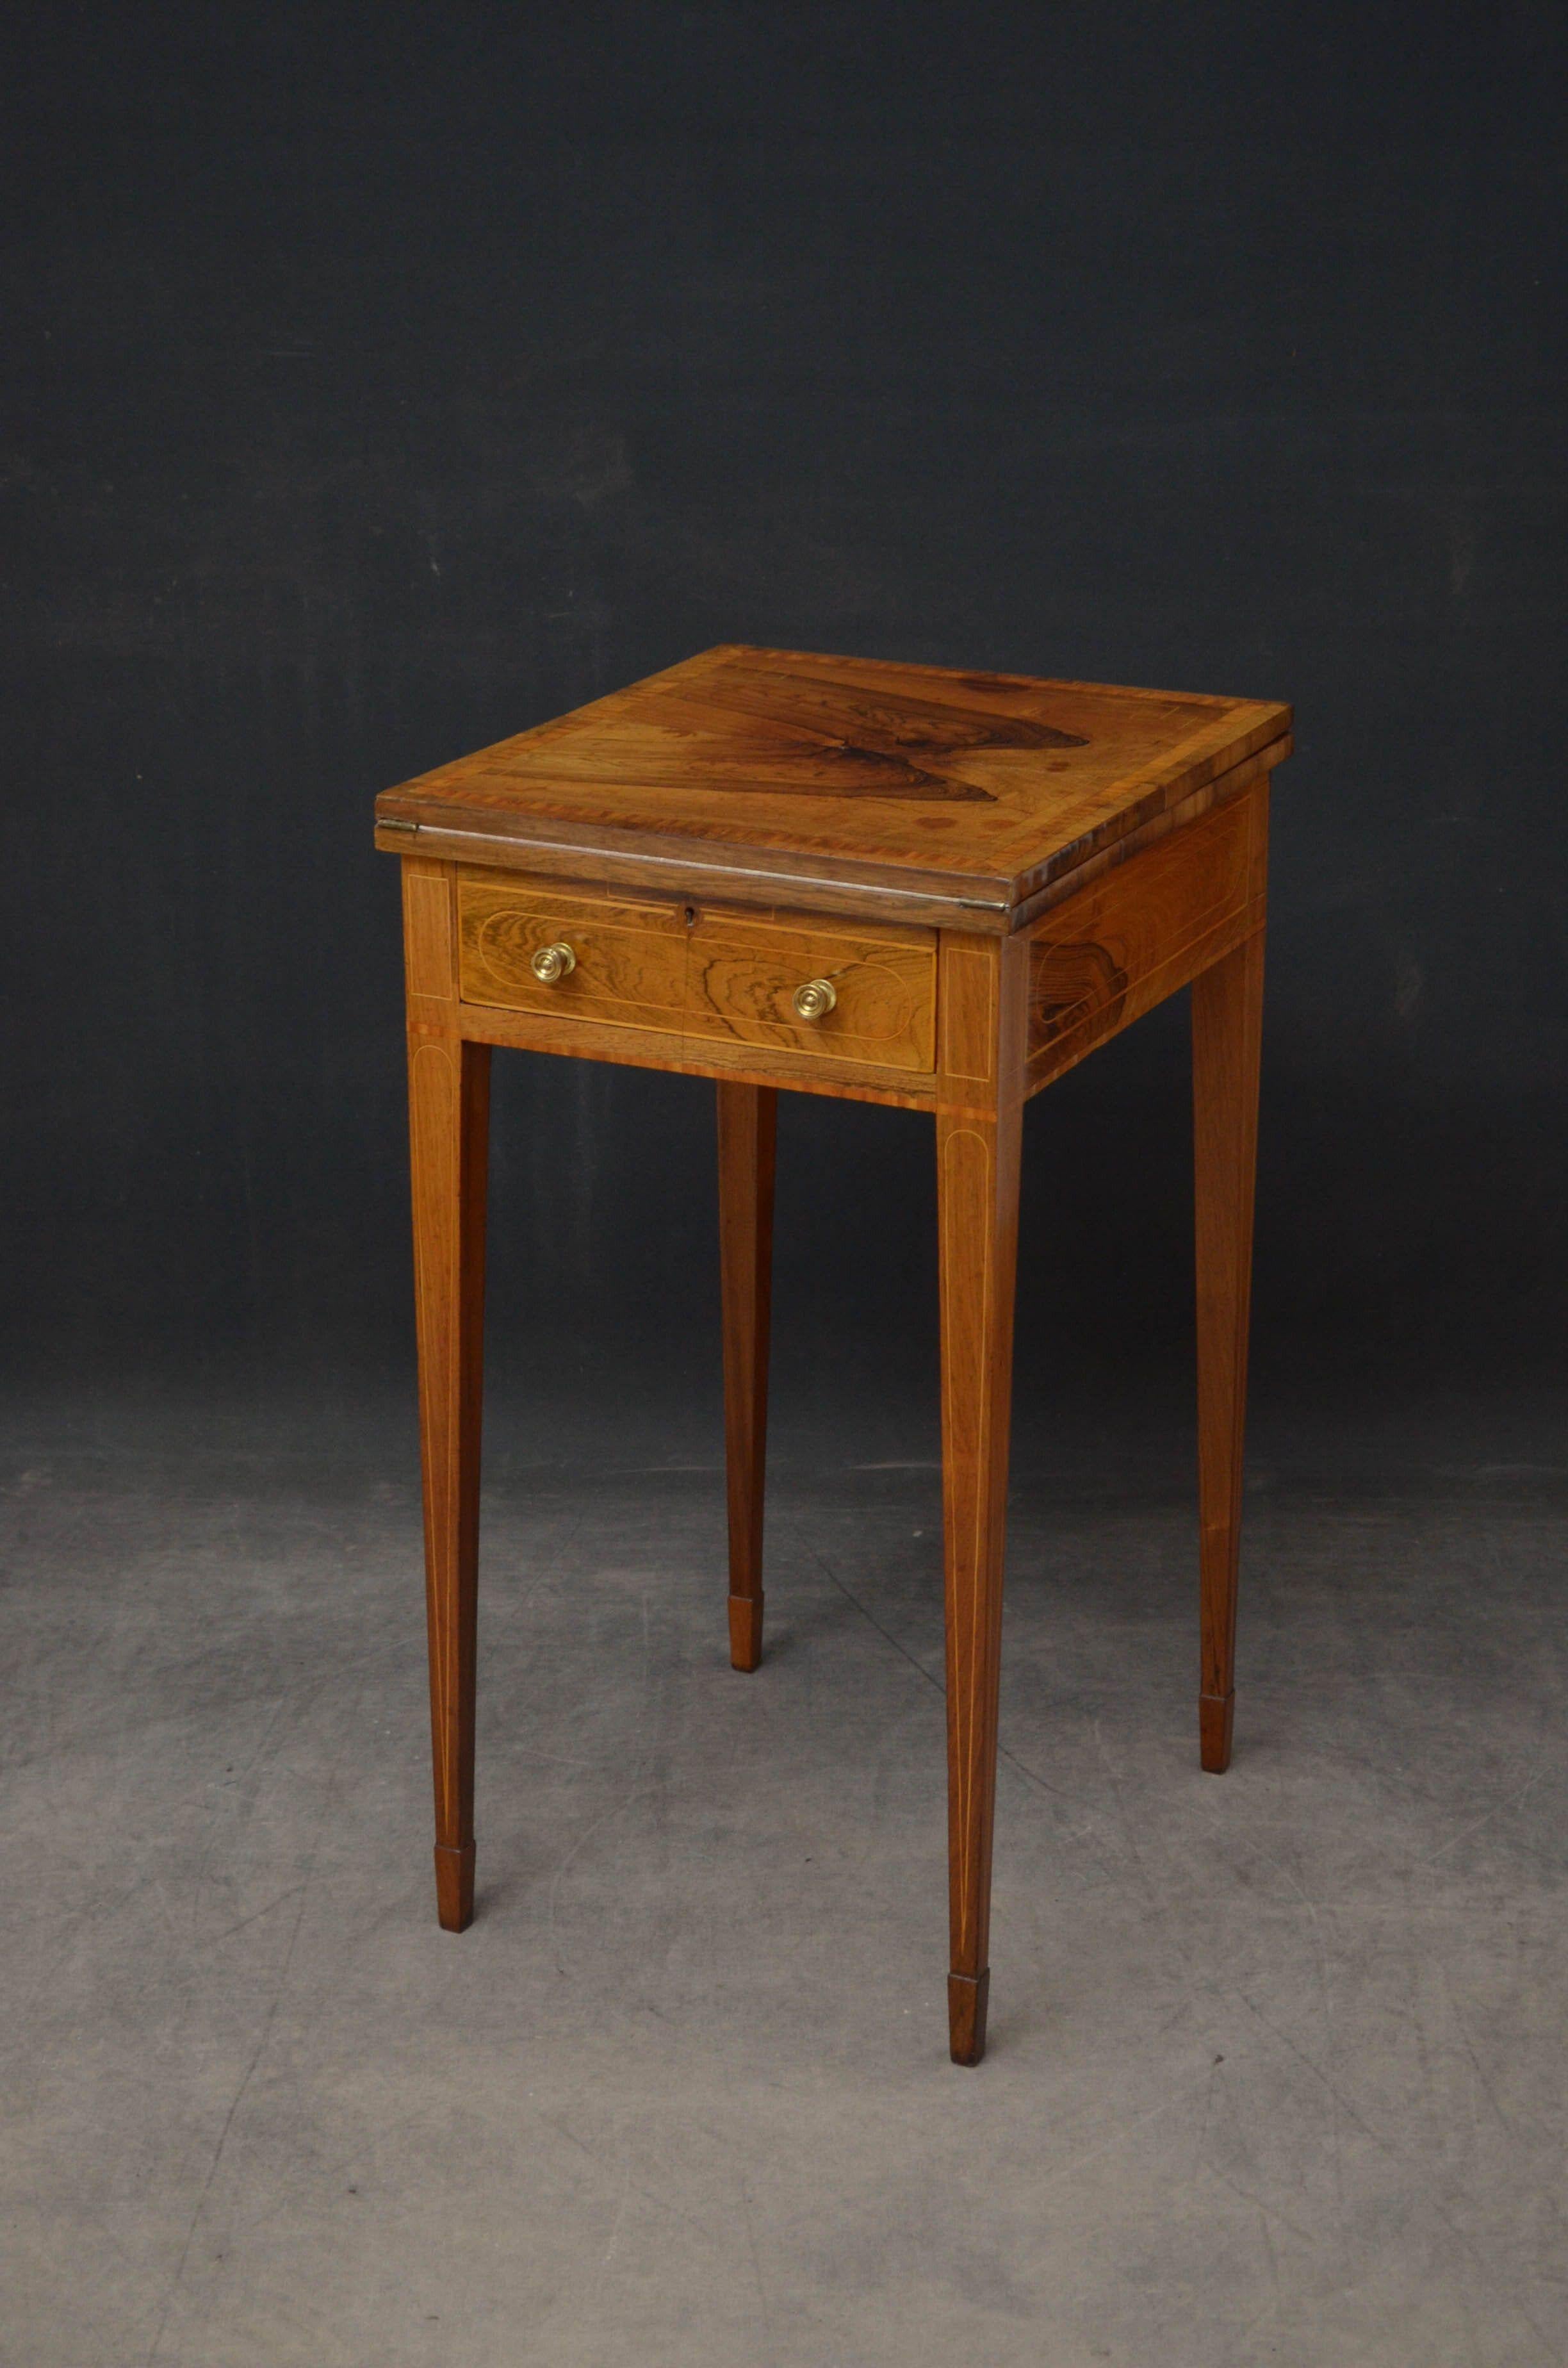 Sn5248 Fine quality Regency writing table or side table in rosewood, having book matched veneered top with satinwood string in and crossbanding which opens to reveal nubuck / suede writing surface above a slider and frieze drawer all fitted with